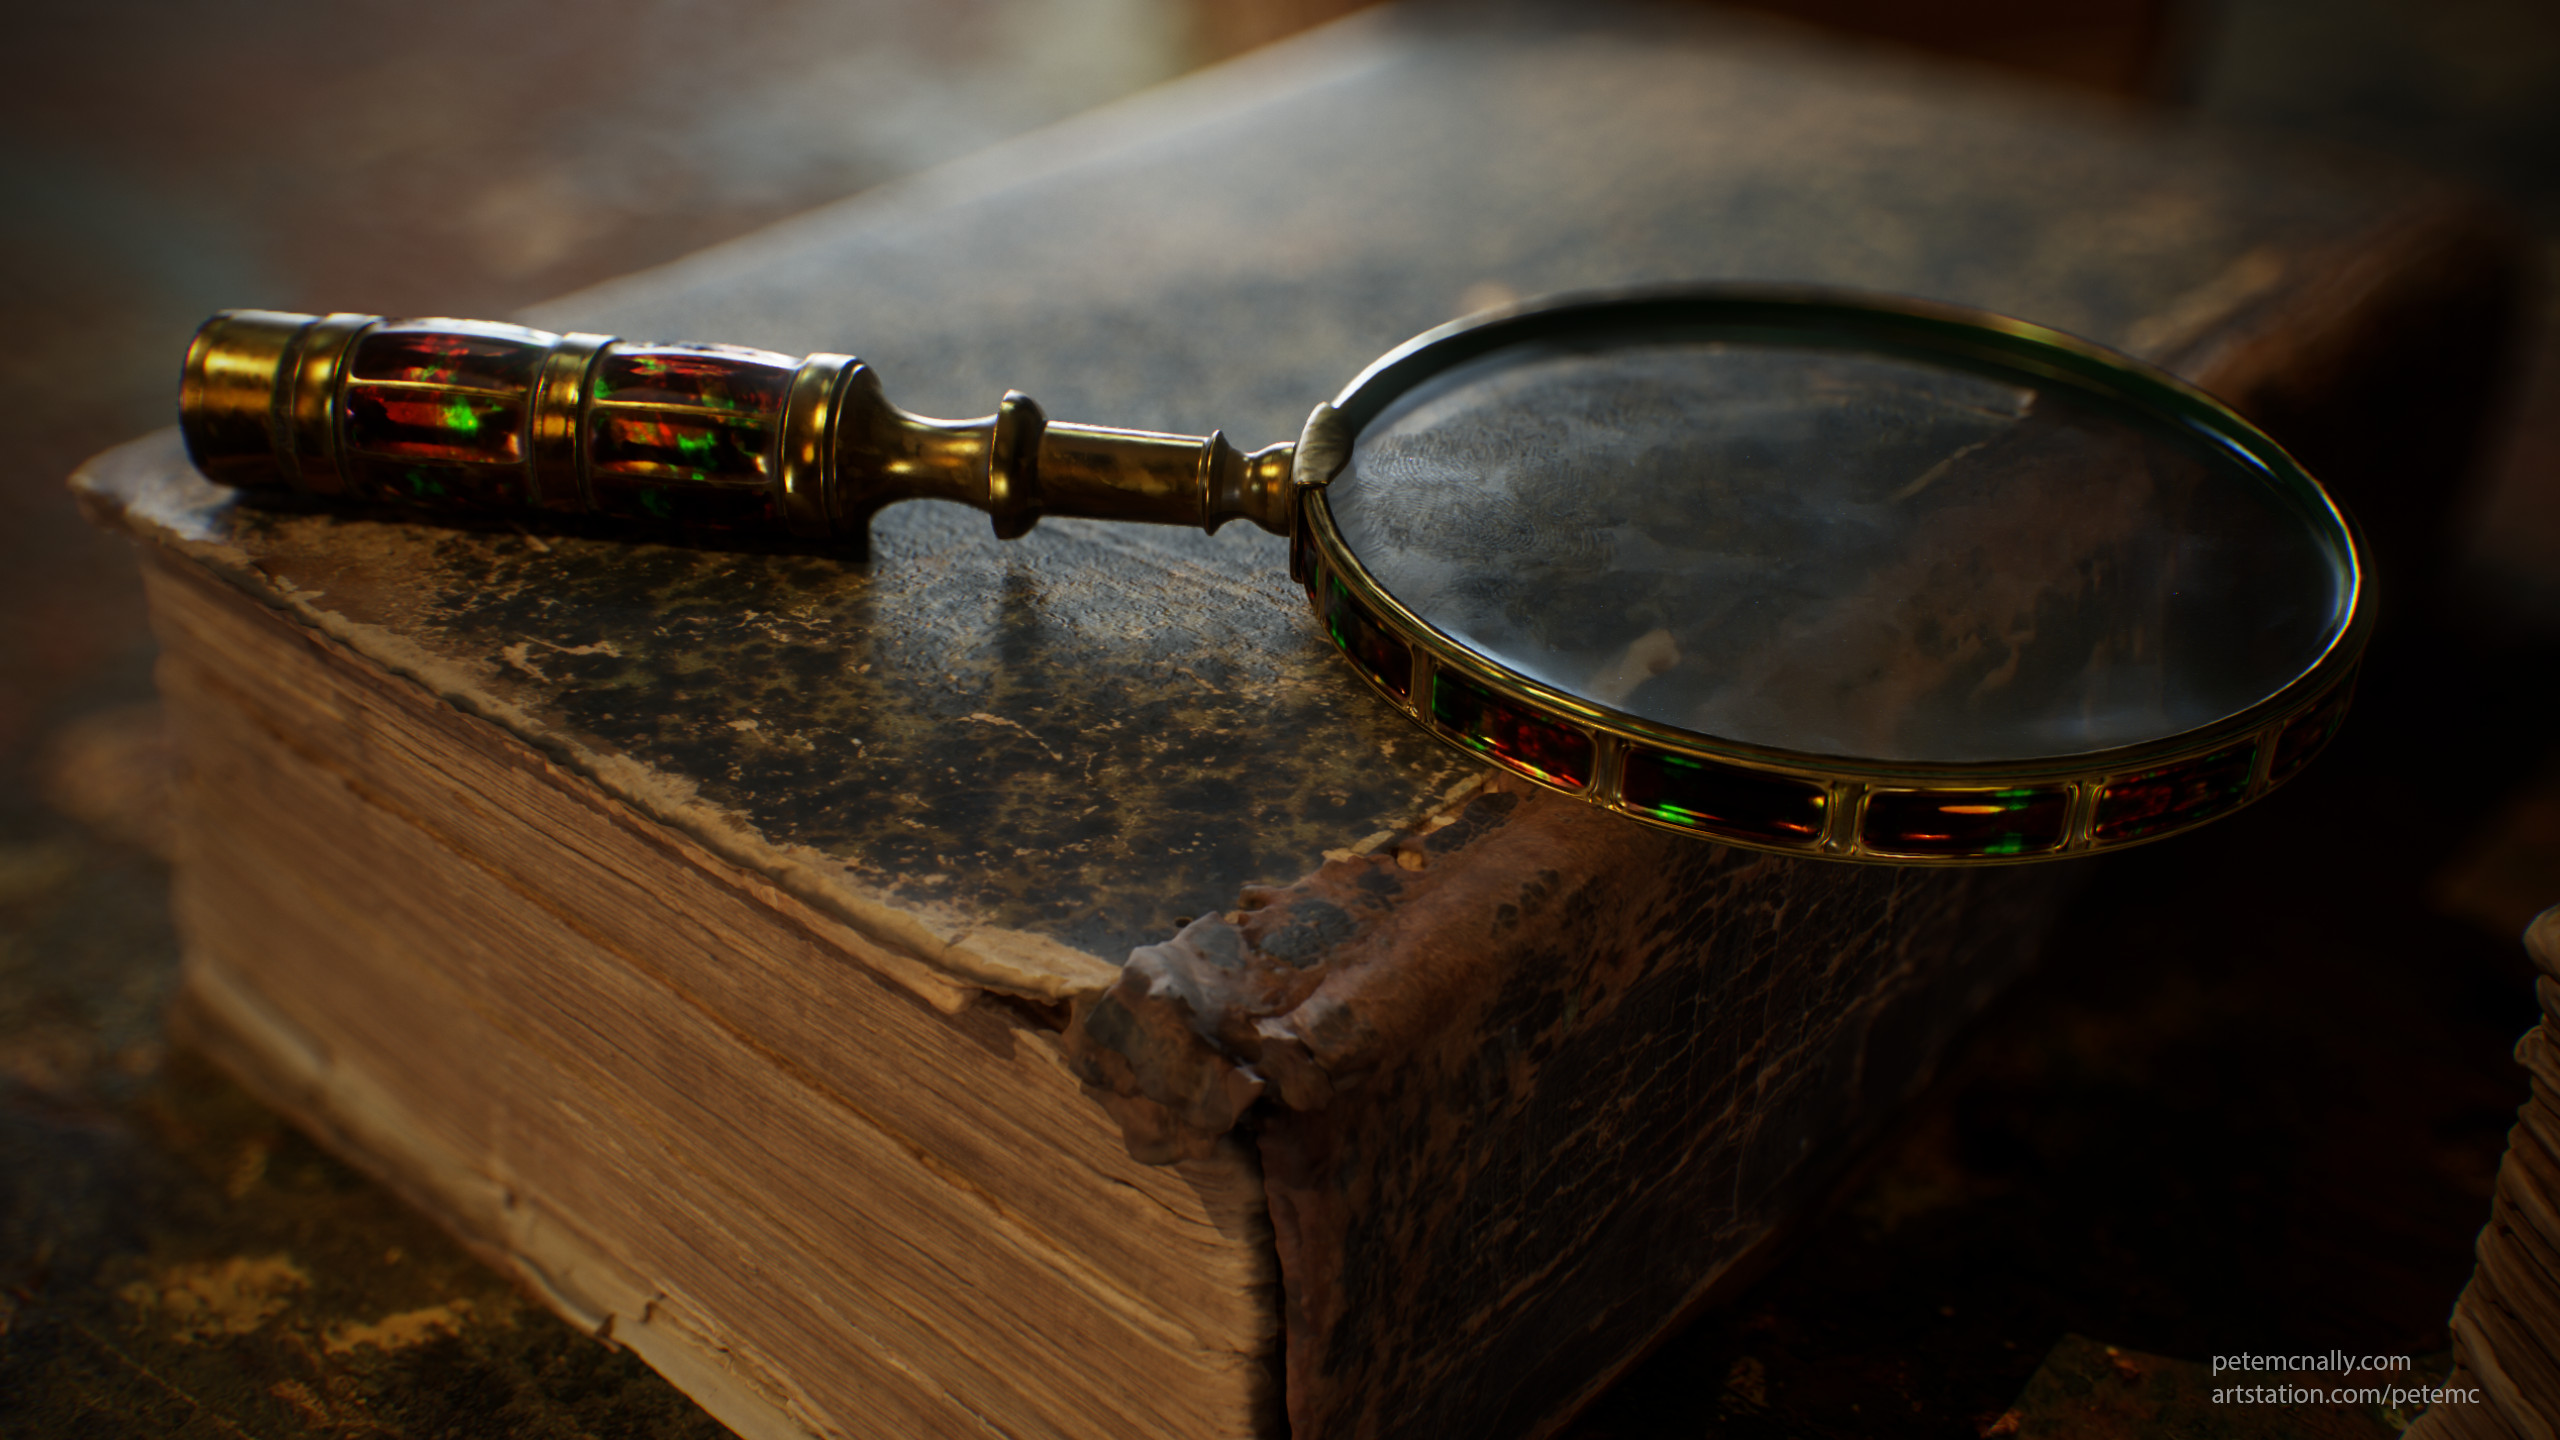 The lens was tricky, looked better in Toolbag 3 I thought, even if the refraction is more accurate with raytracing here